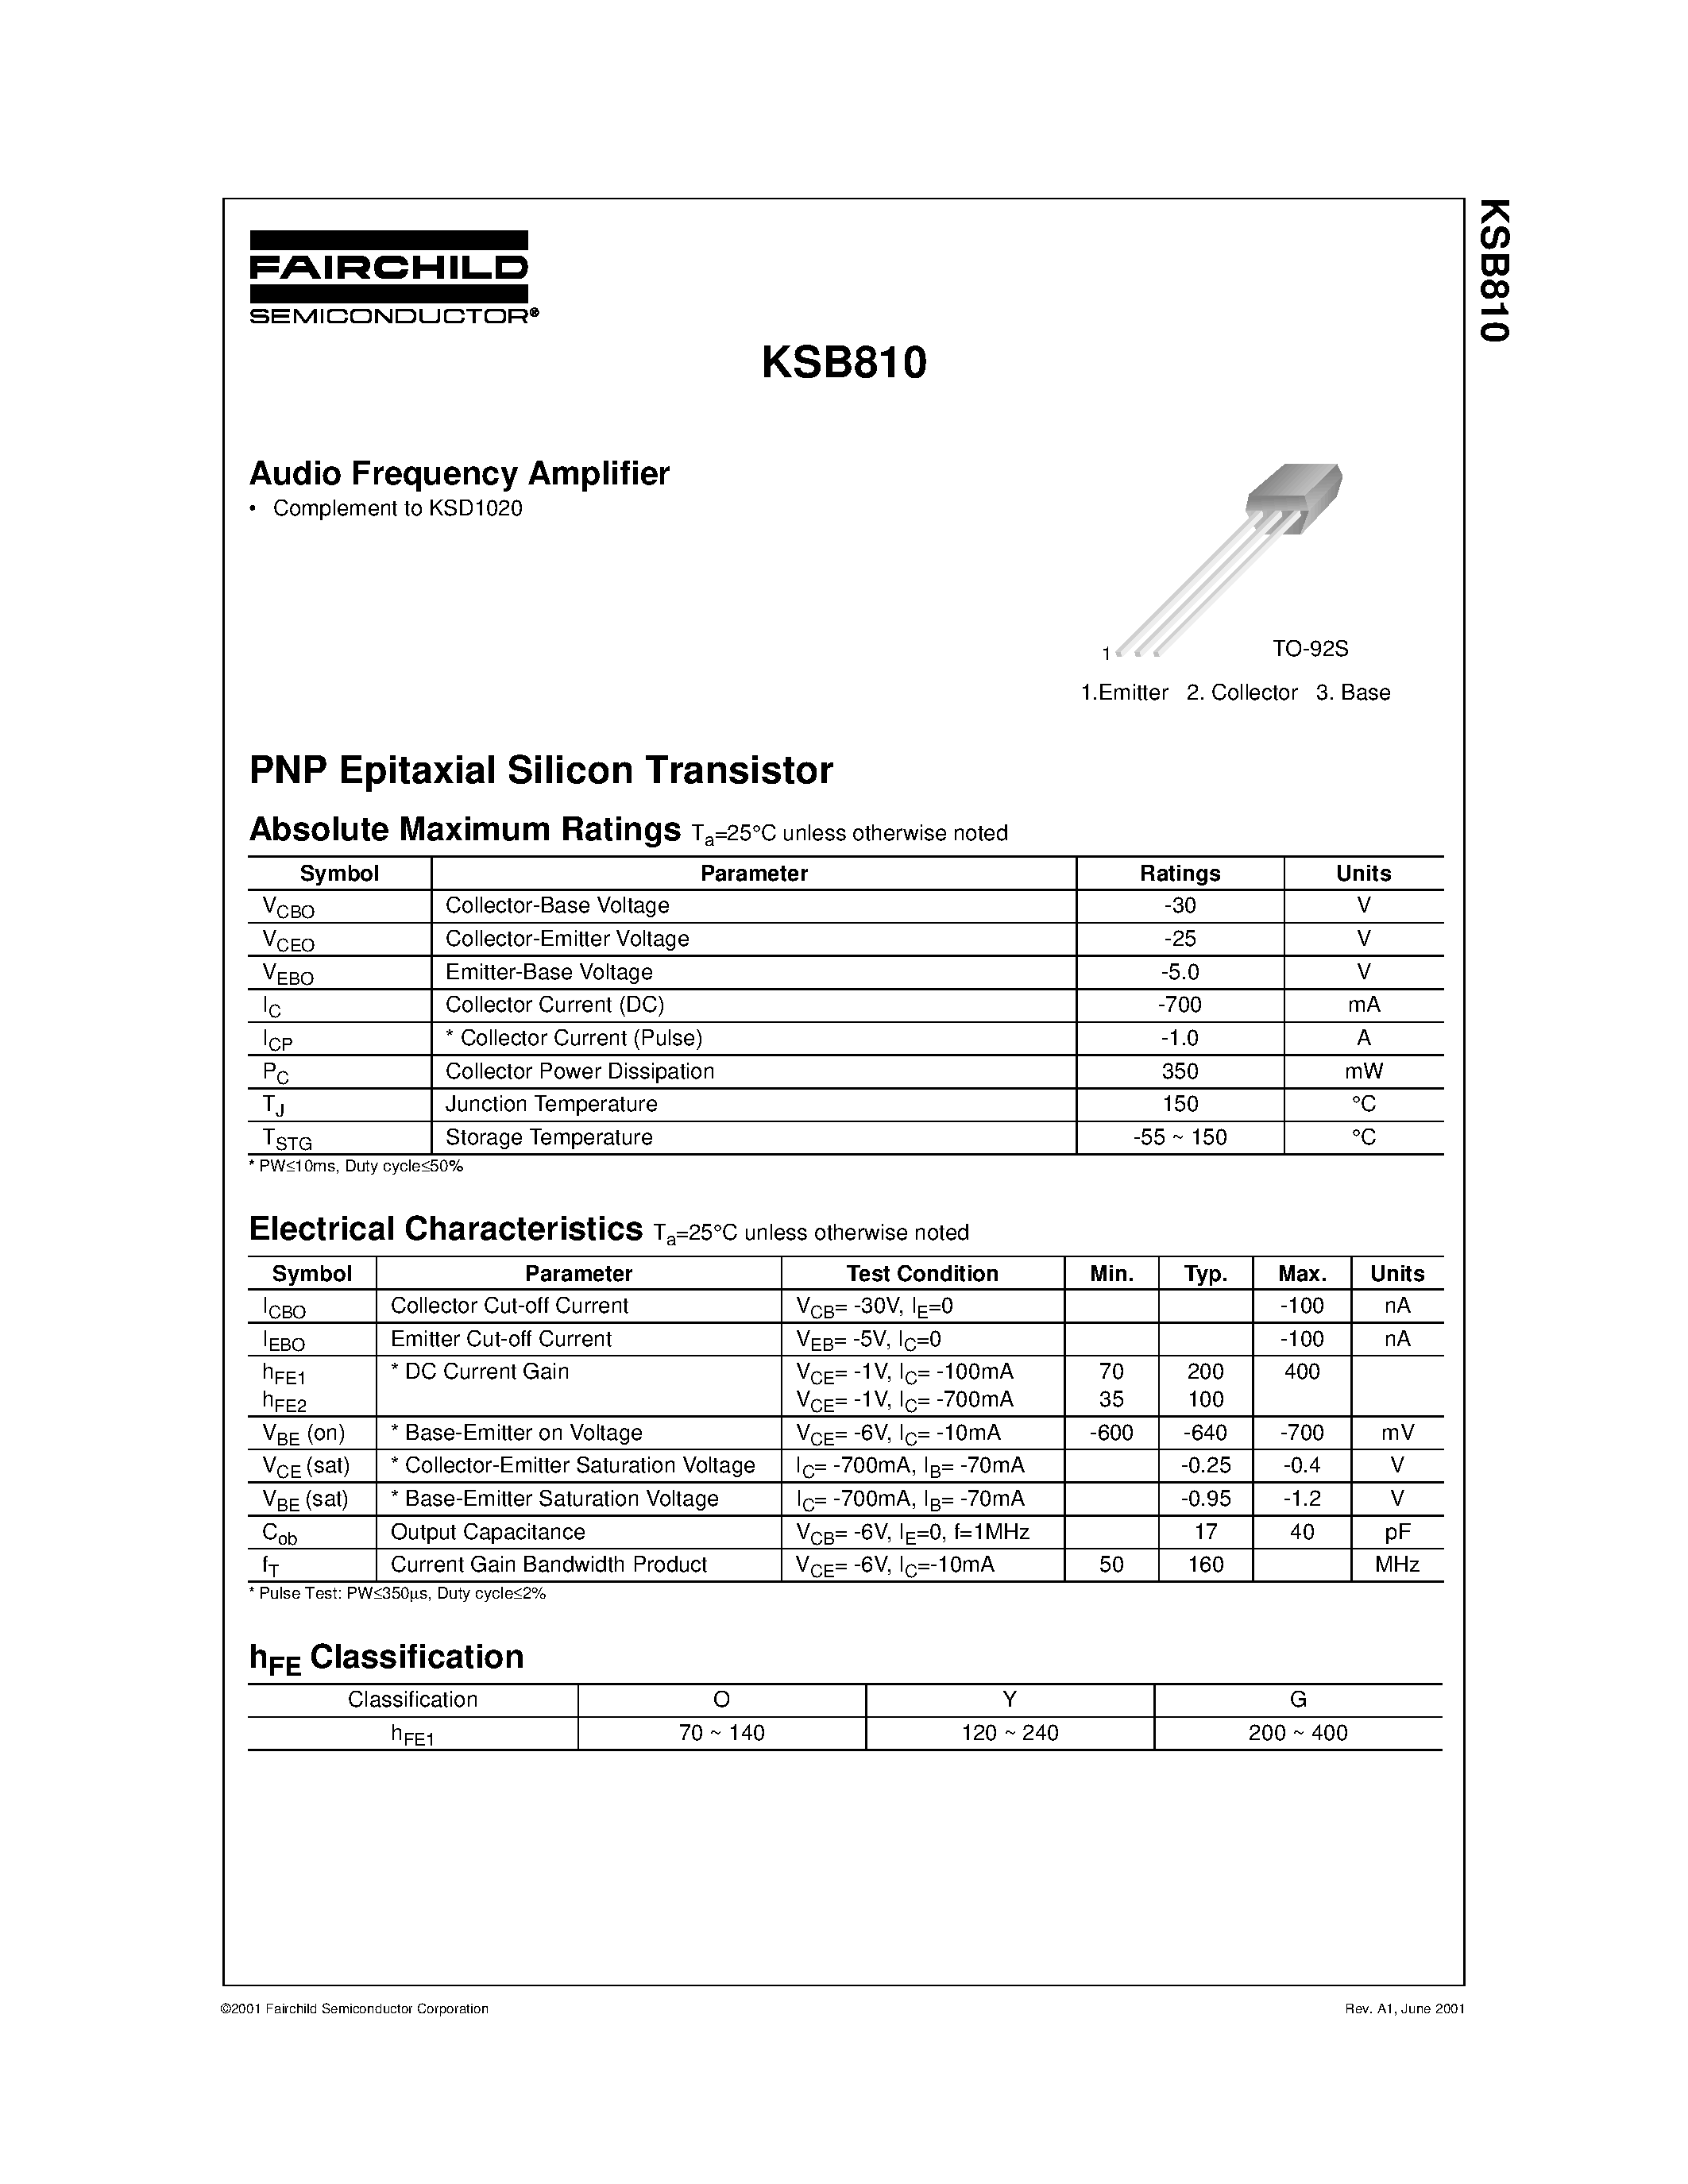 Datasheet KSB810 - Audio Frequency Amplifier page 1